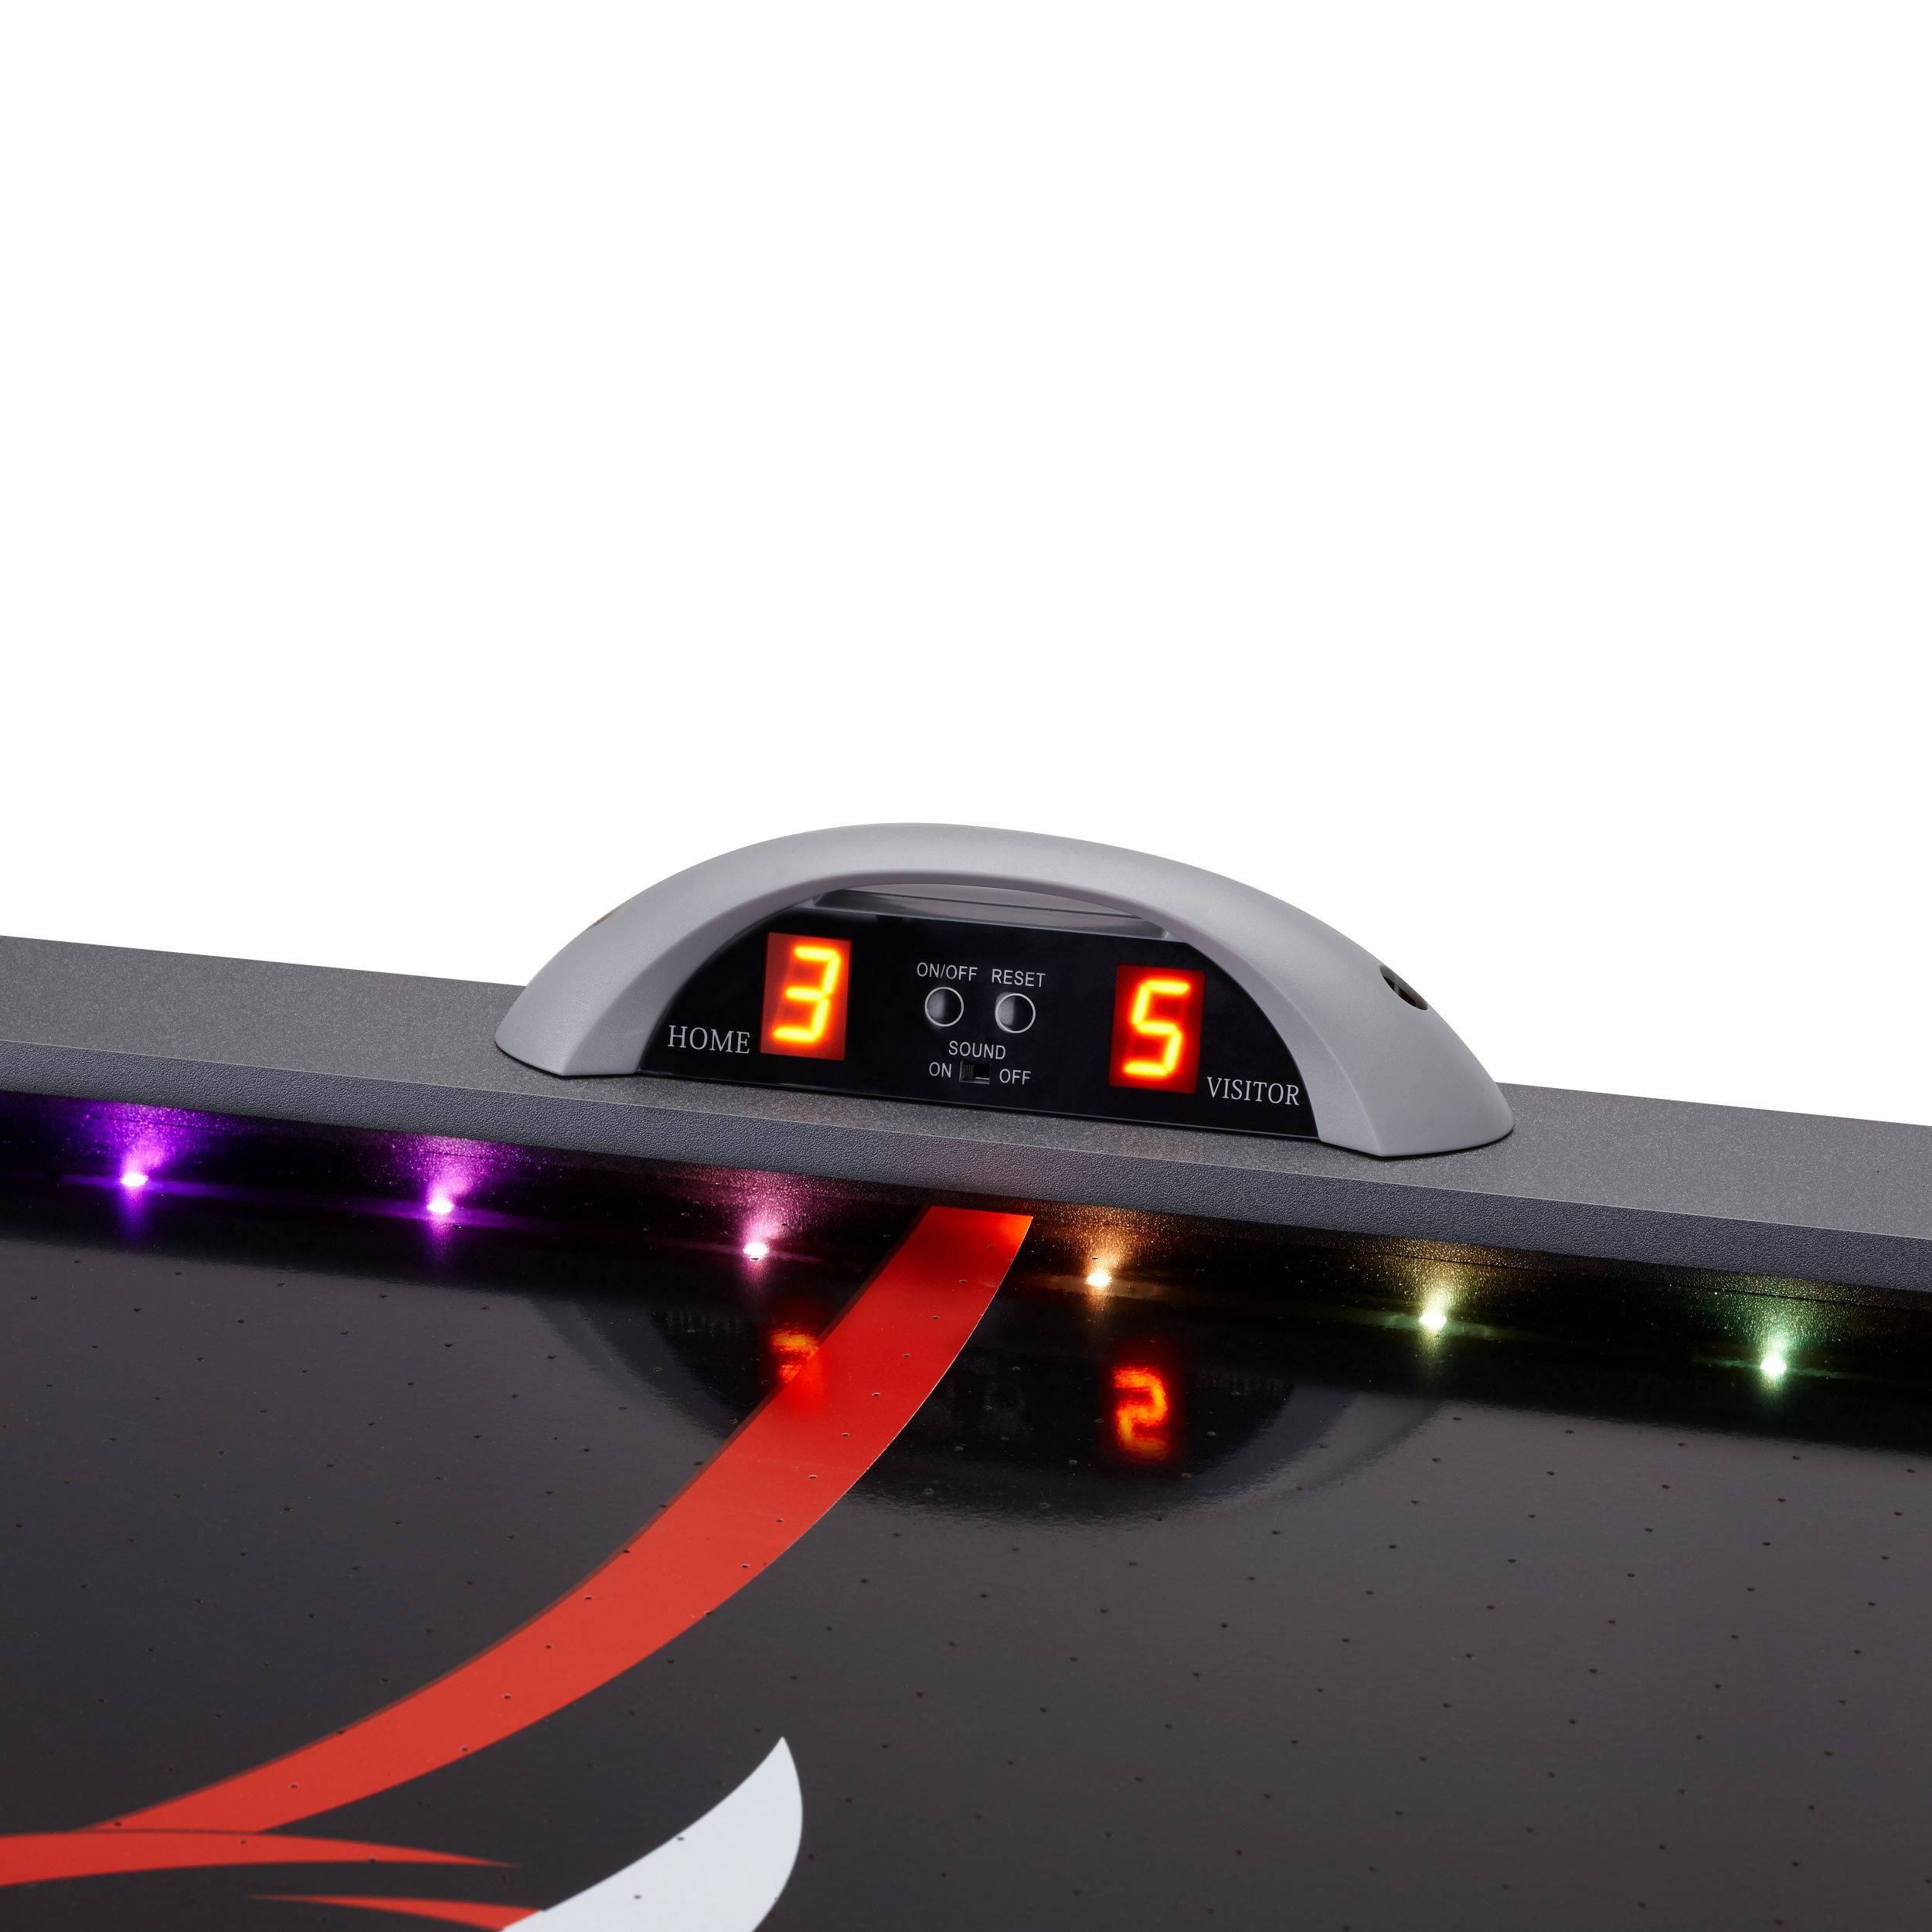 Introducing LED scoring, the most convenient and durable scoring solution at an unbeatable price. With fast shipping throughout the United States, you won't find a better deal anywhere else!